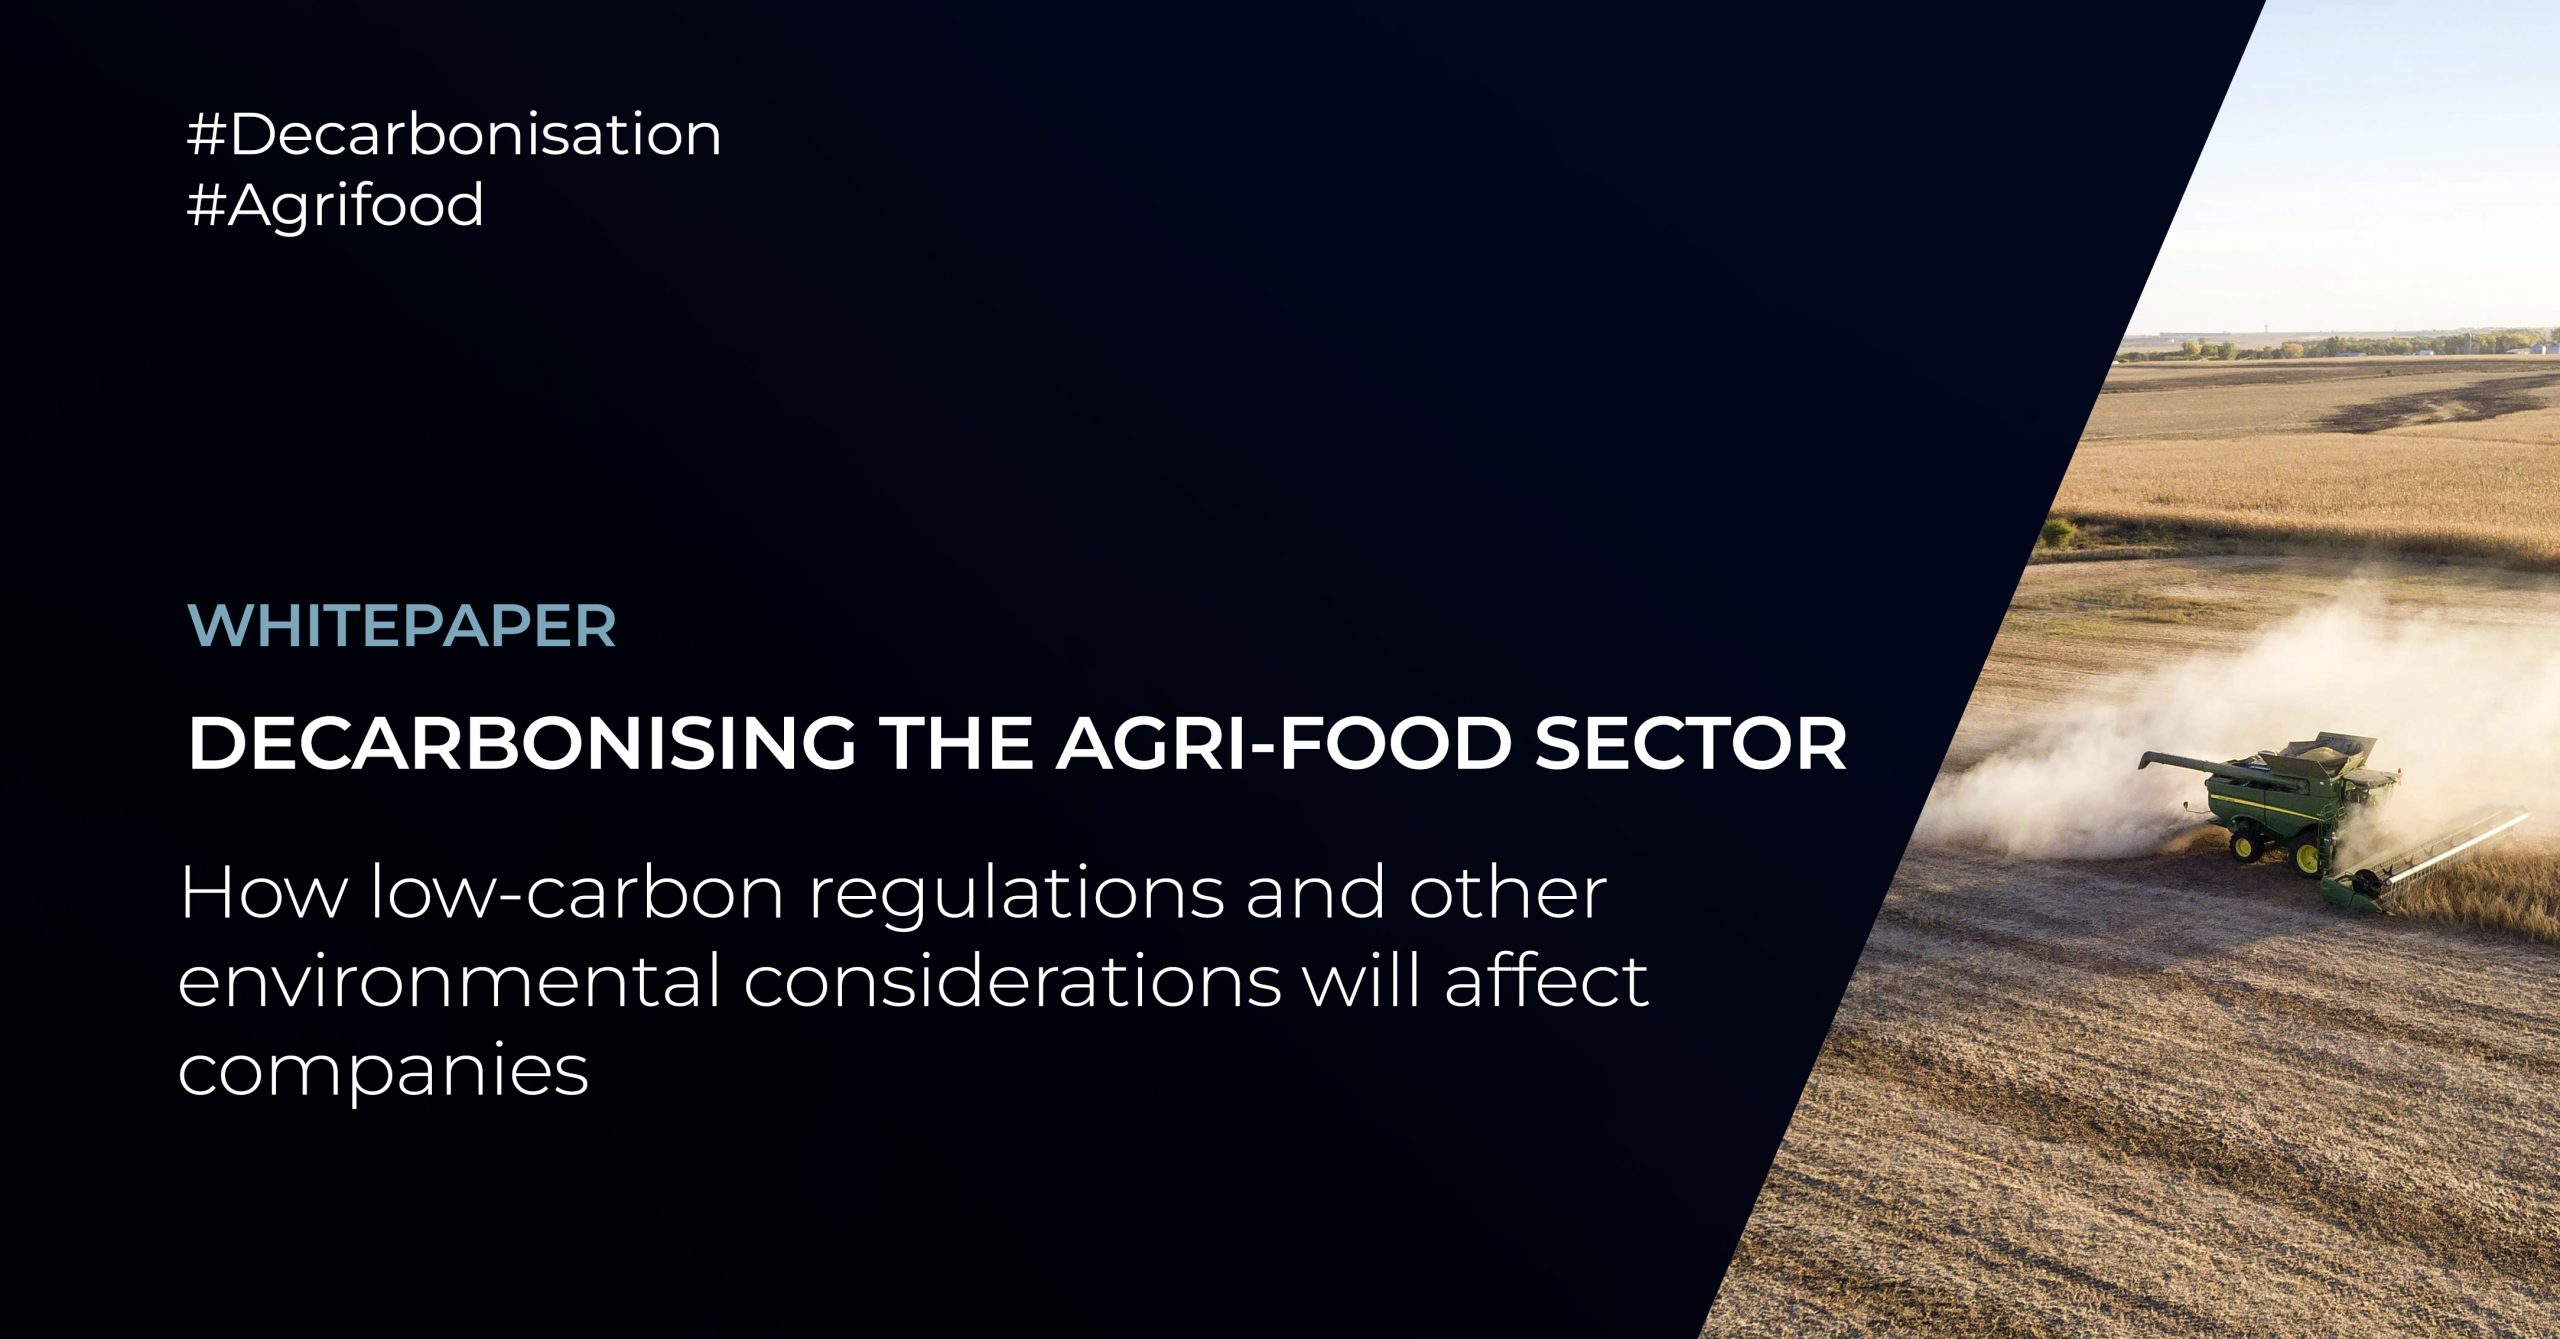 Decarbonising the agri-food sector